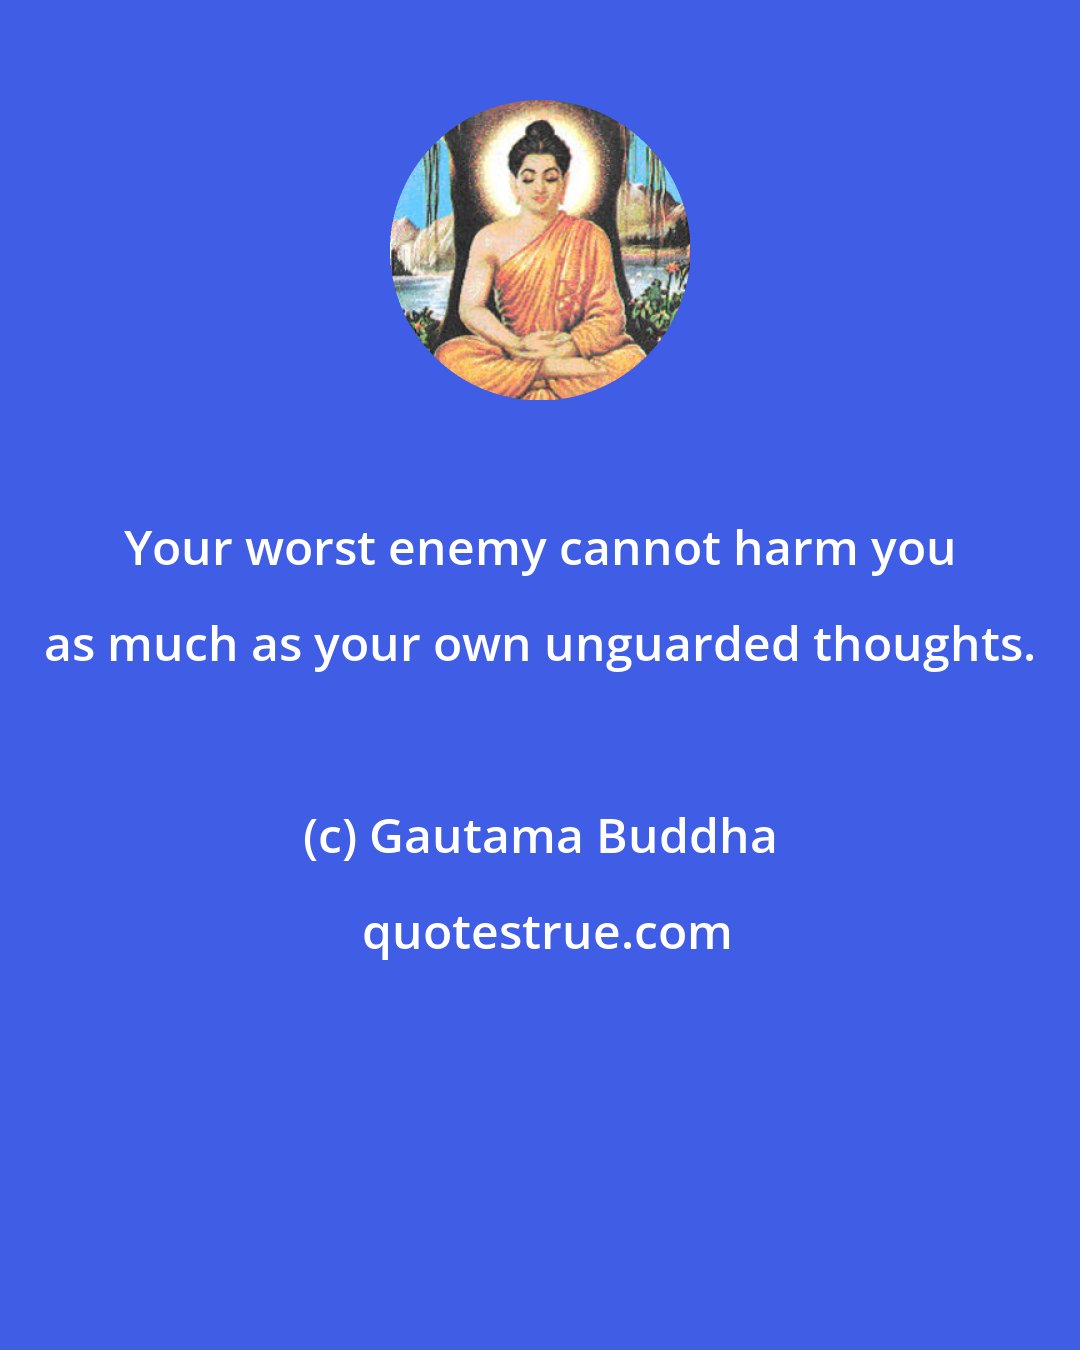 Gautama Buddha: Your worst enemy cannot harm you as much as your own unguarded thoughts.